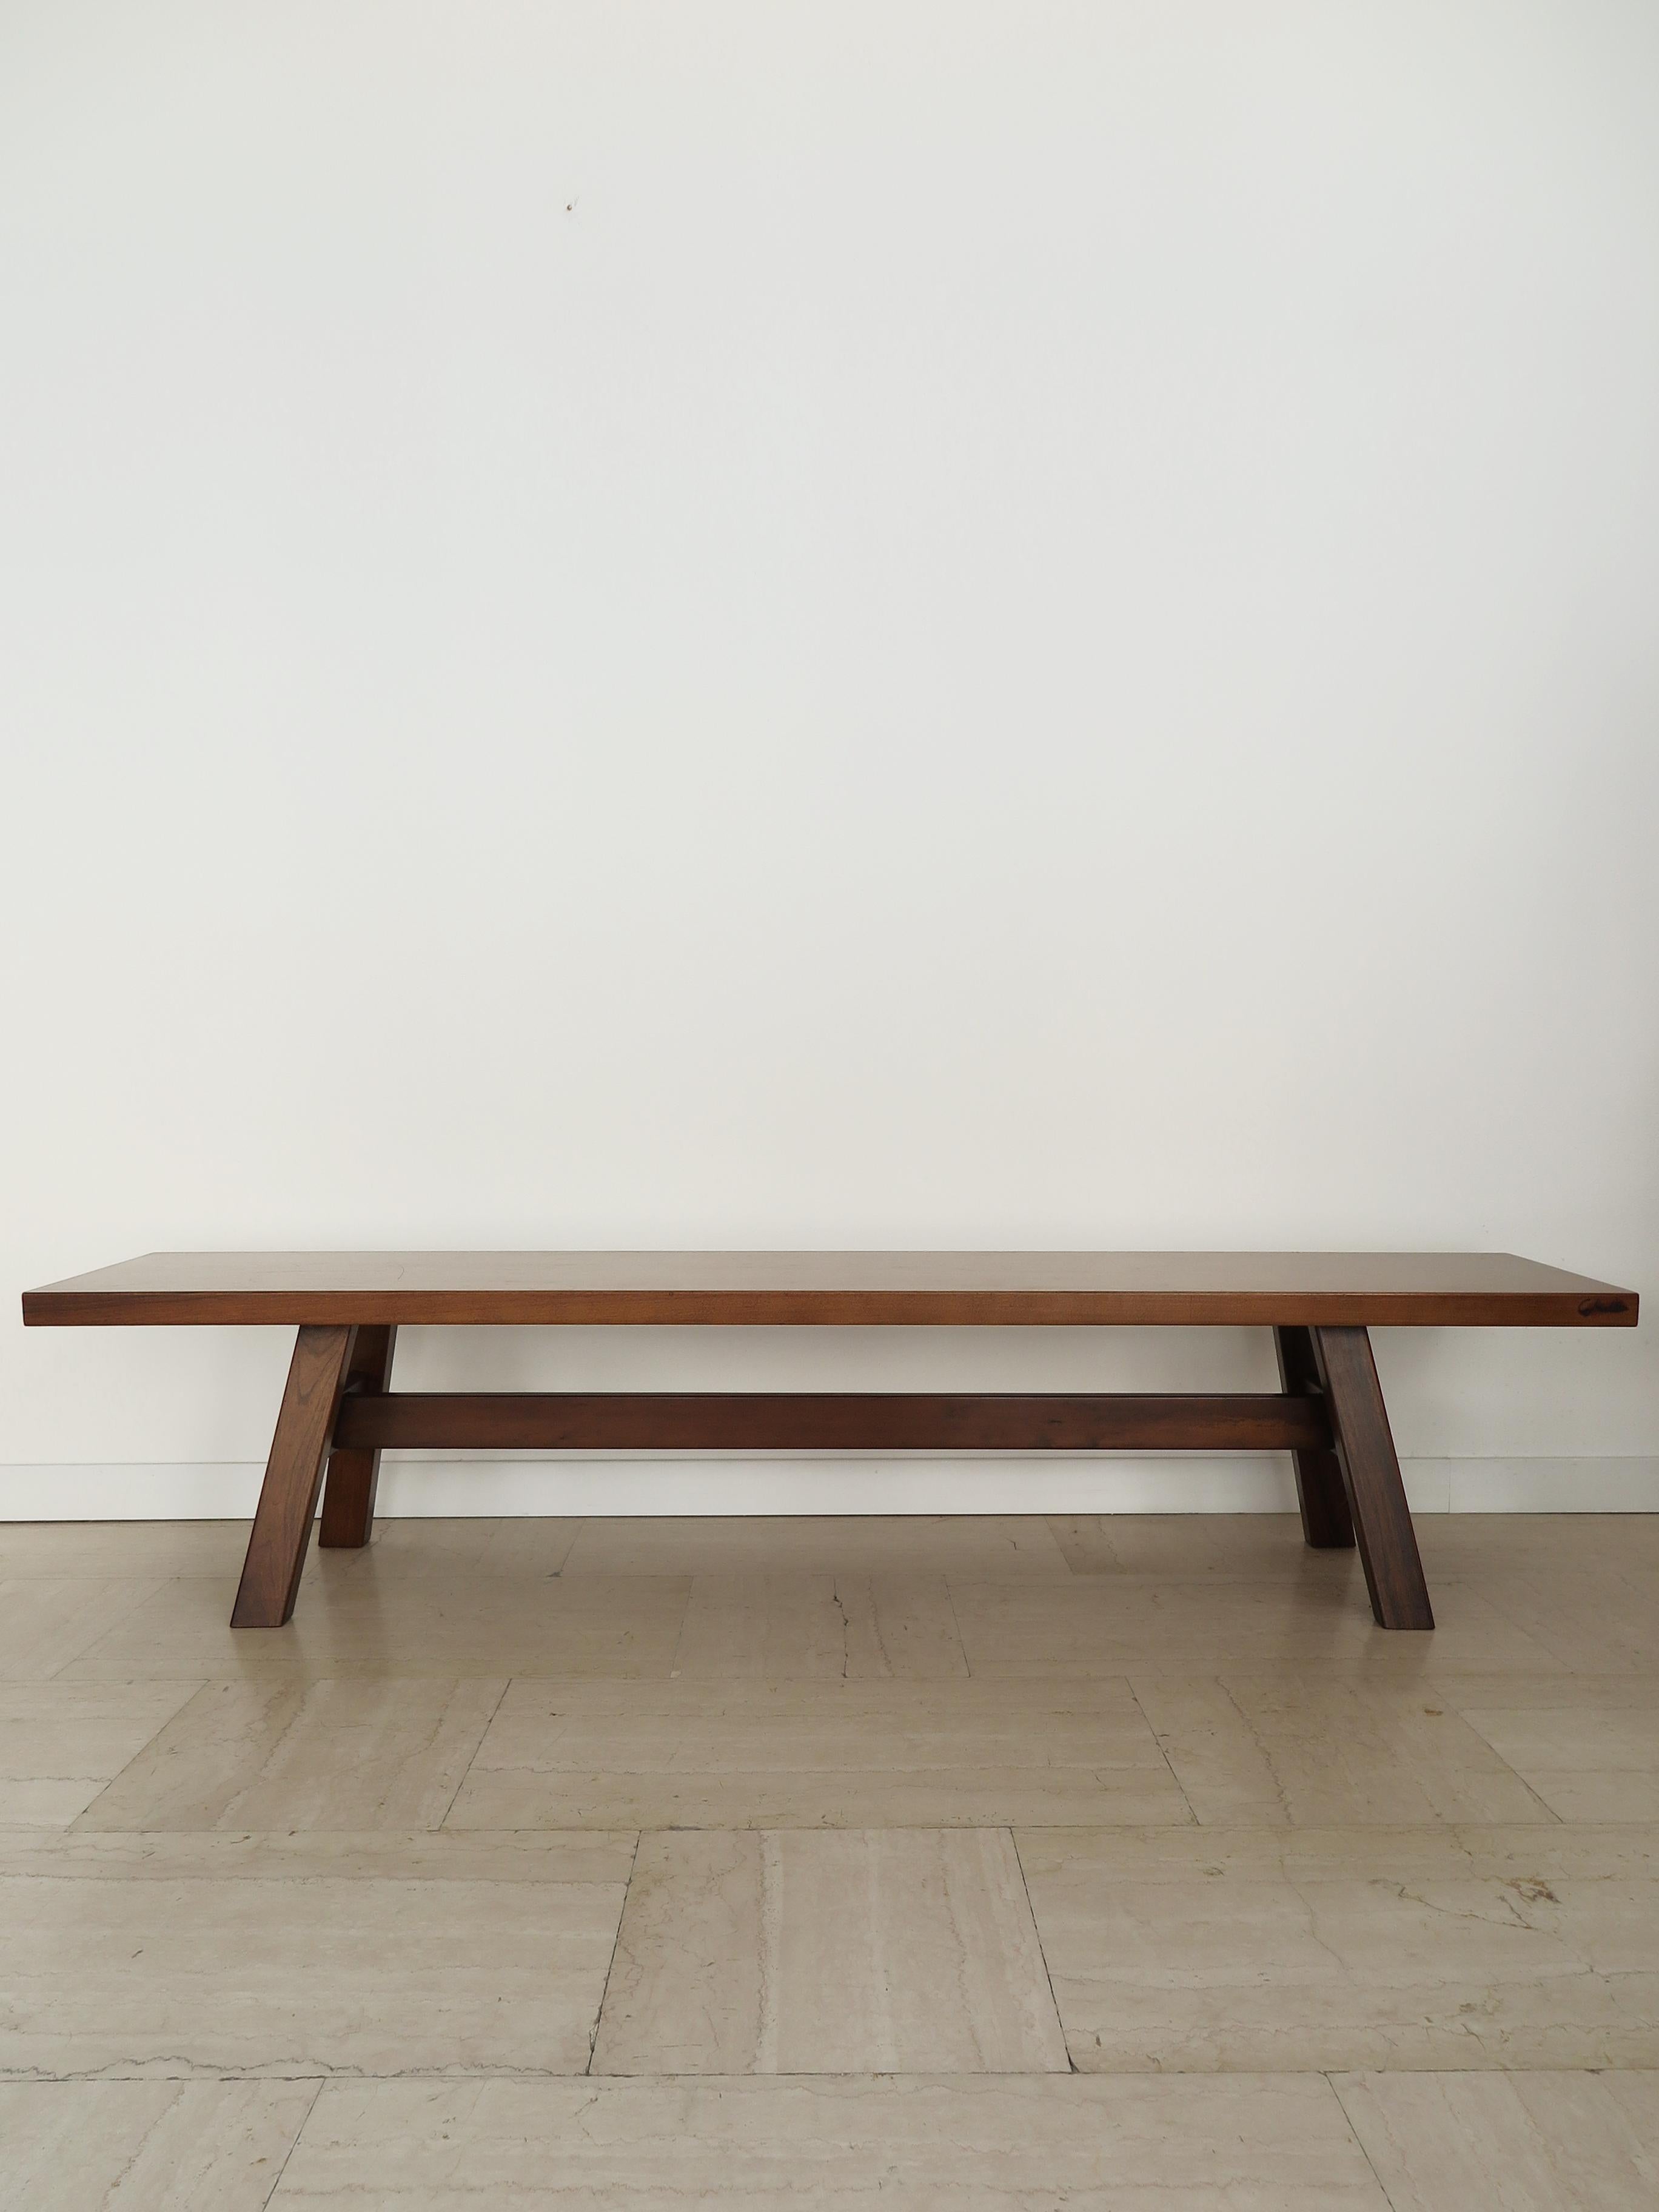 Italian midcentury modern design walnut bench or console table serie Torbecchia designed by Giovanni Michelucci and produced by Poltronova, Italy 1964.
Fire-branded G. Michelucci trademark and original Poltronova adhesive label.

Please note that